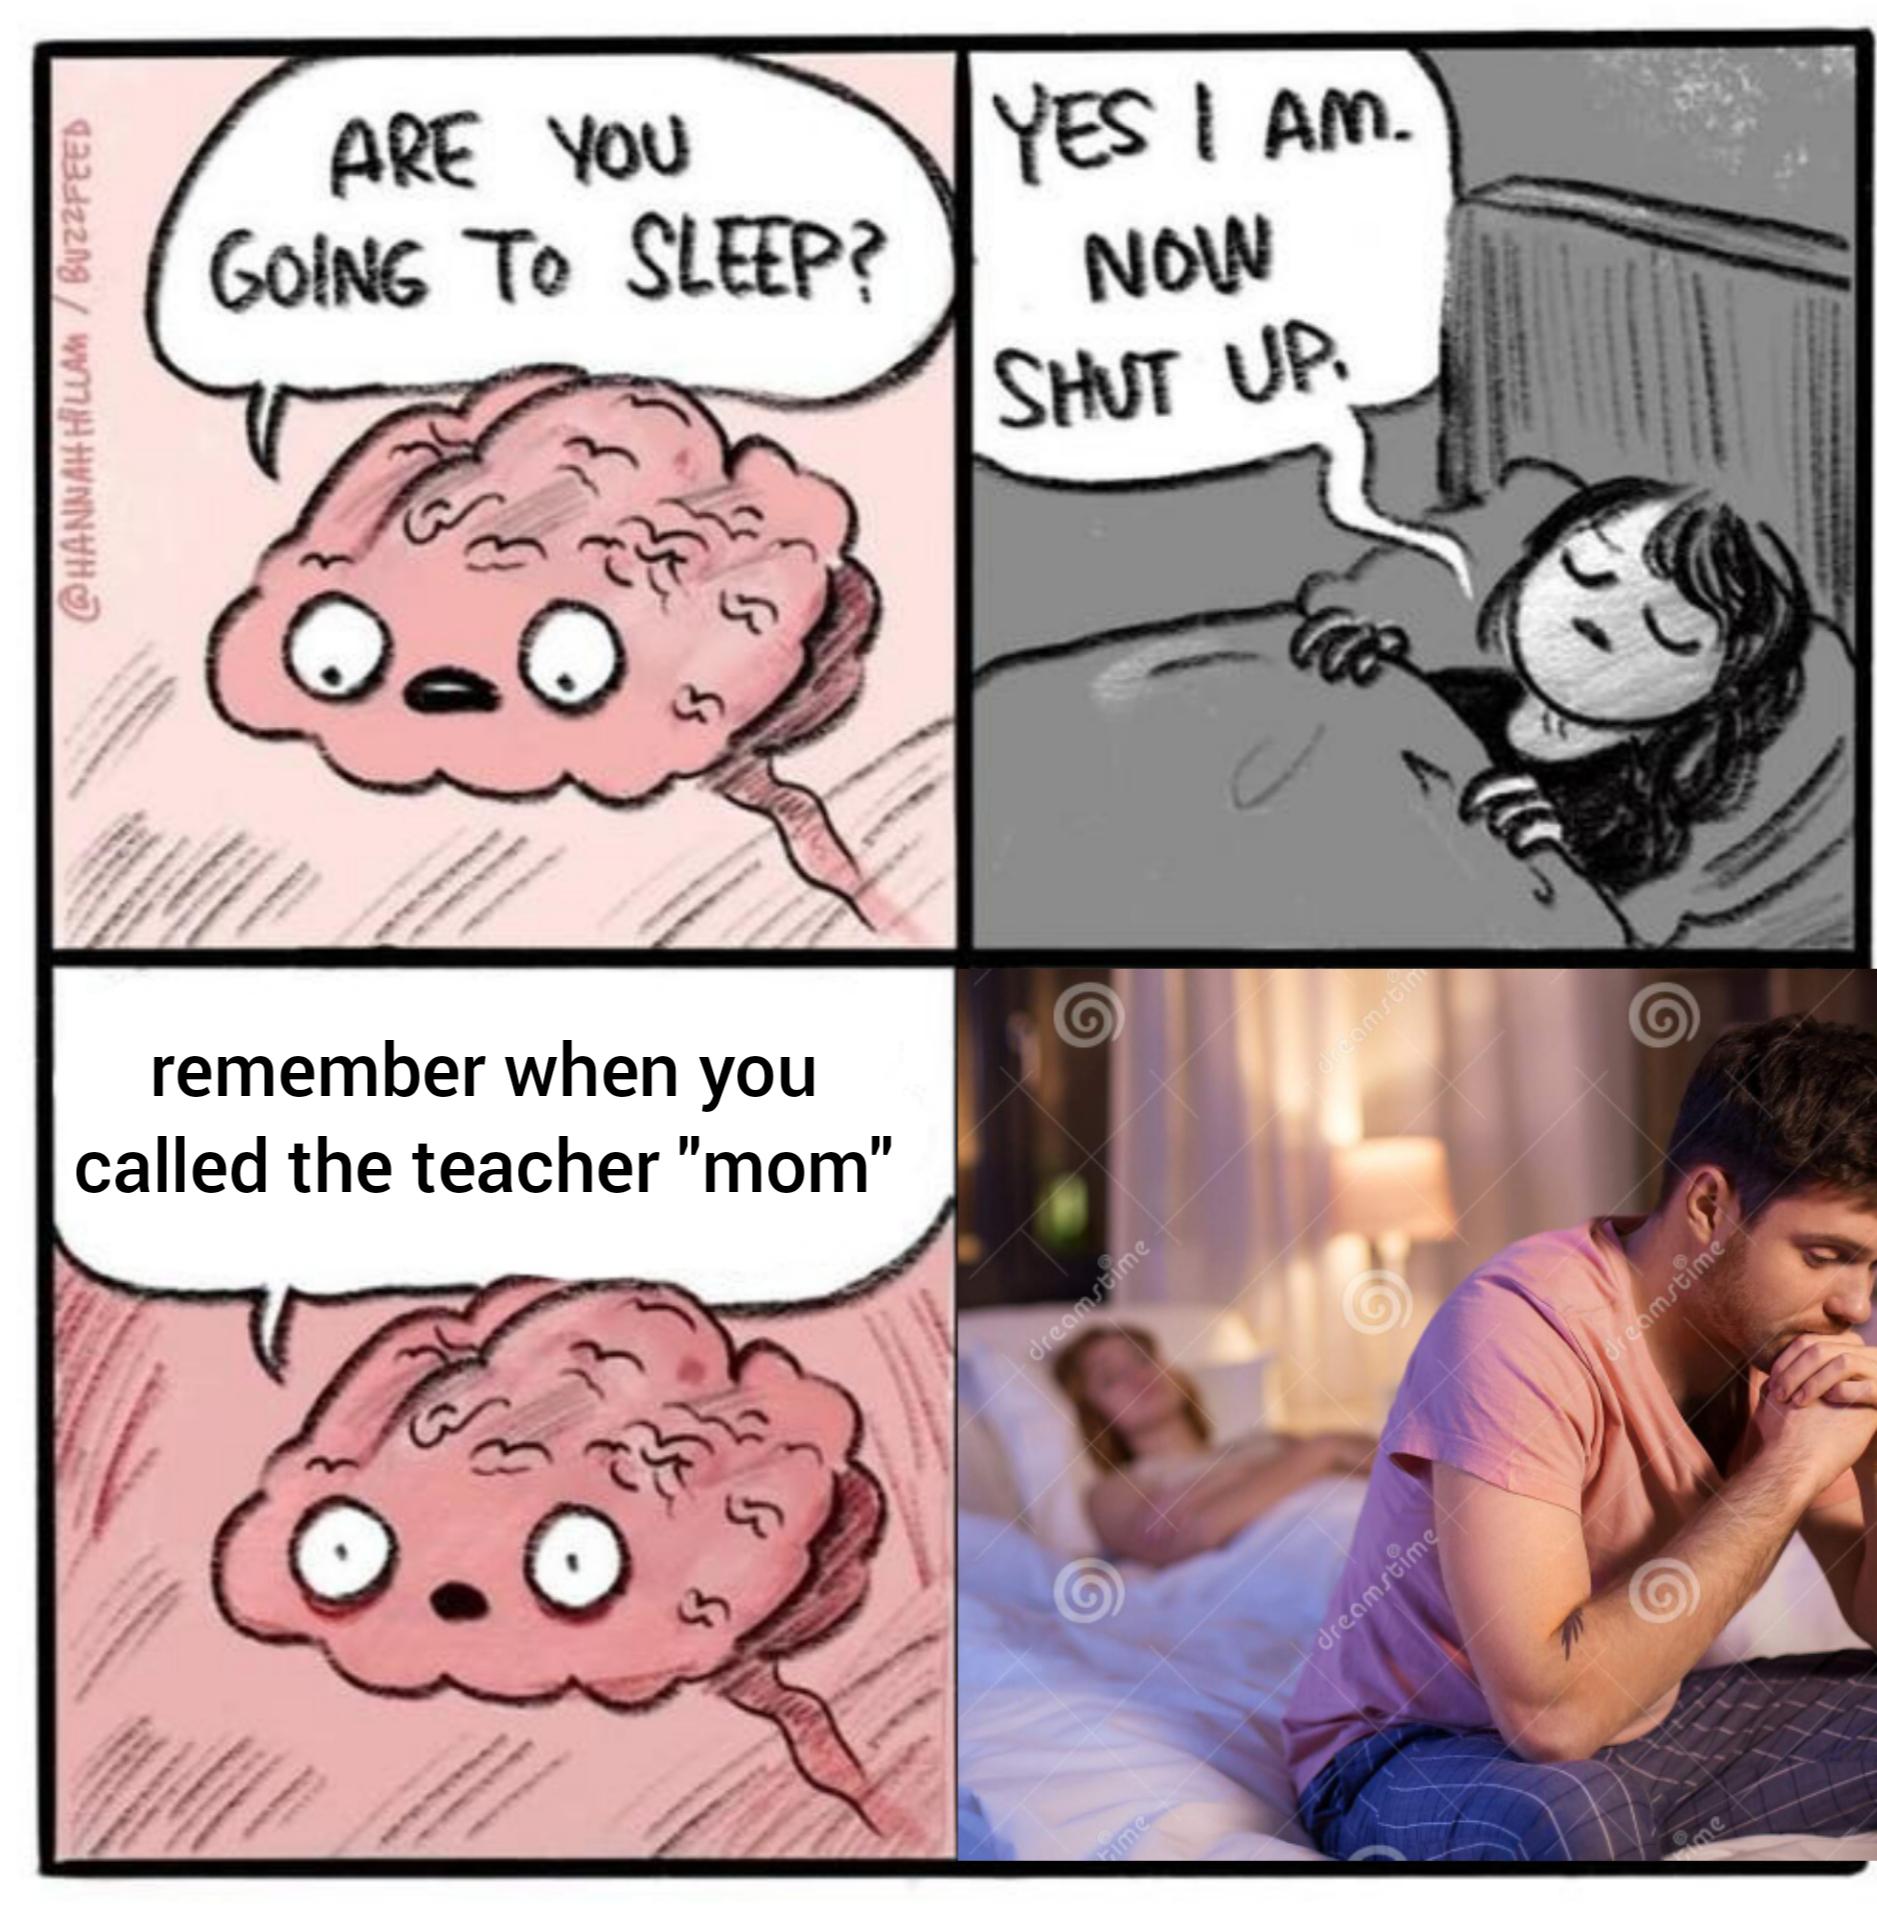 best relatable memes - Are You Going To Sleep? Yes I Am. Now 12342219 Wahunnyha Shut Up che omst remember when you called the teacher "mom" dreamstime dreamstime dreamstime